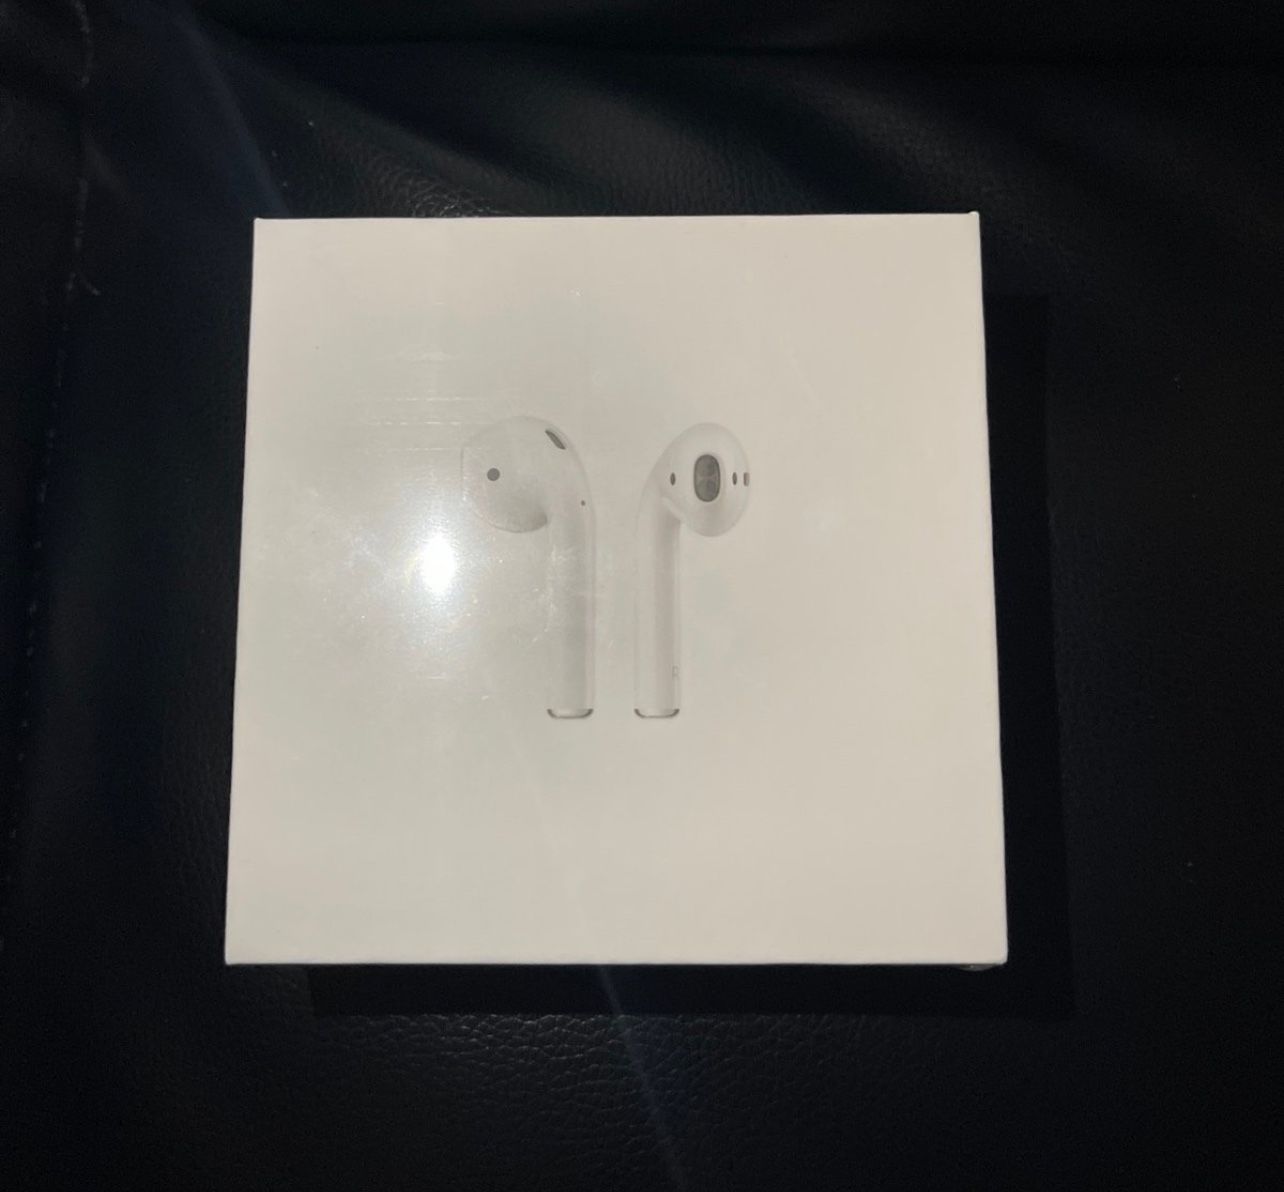 Brand New Generation 1 Air Pods With Wireless Charging Case